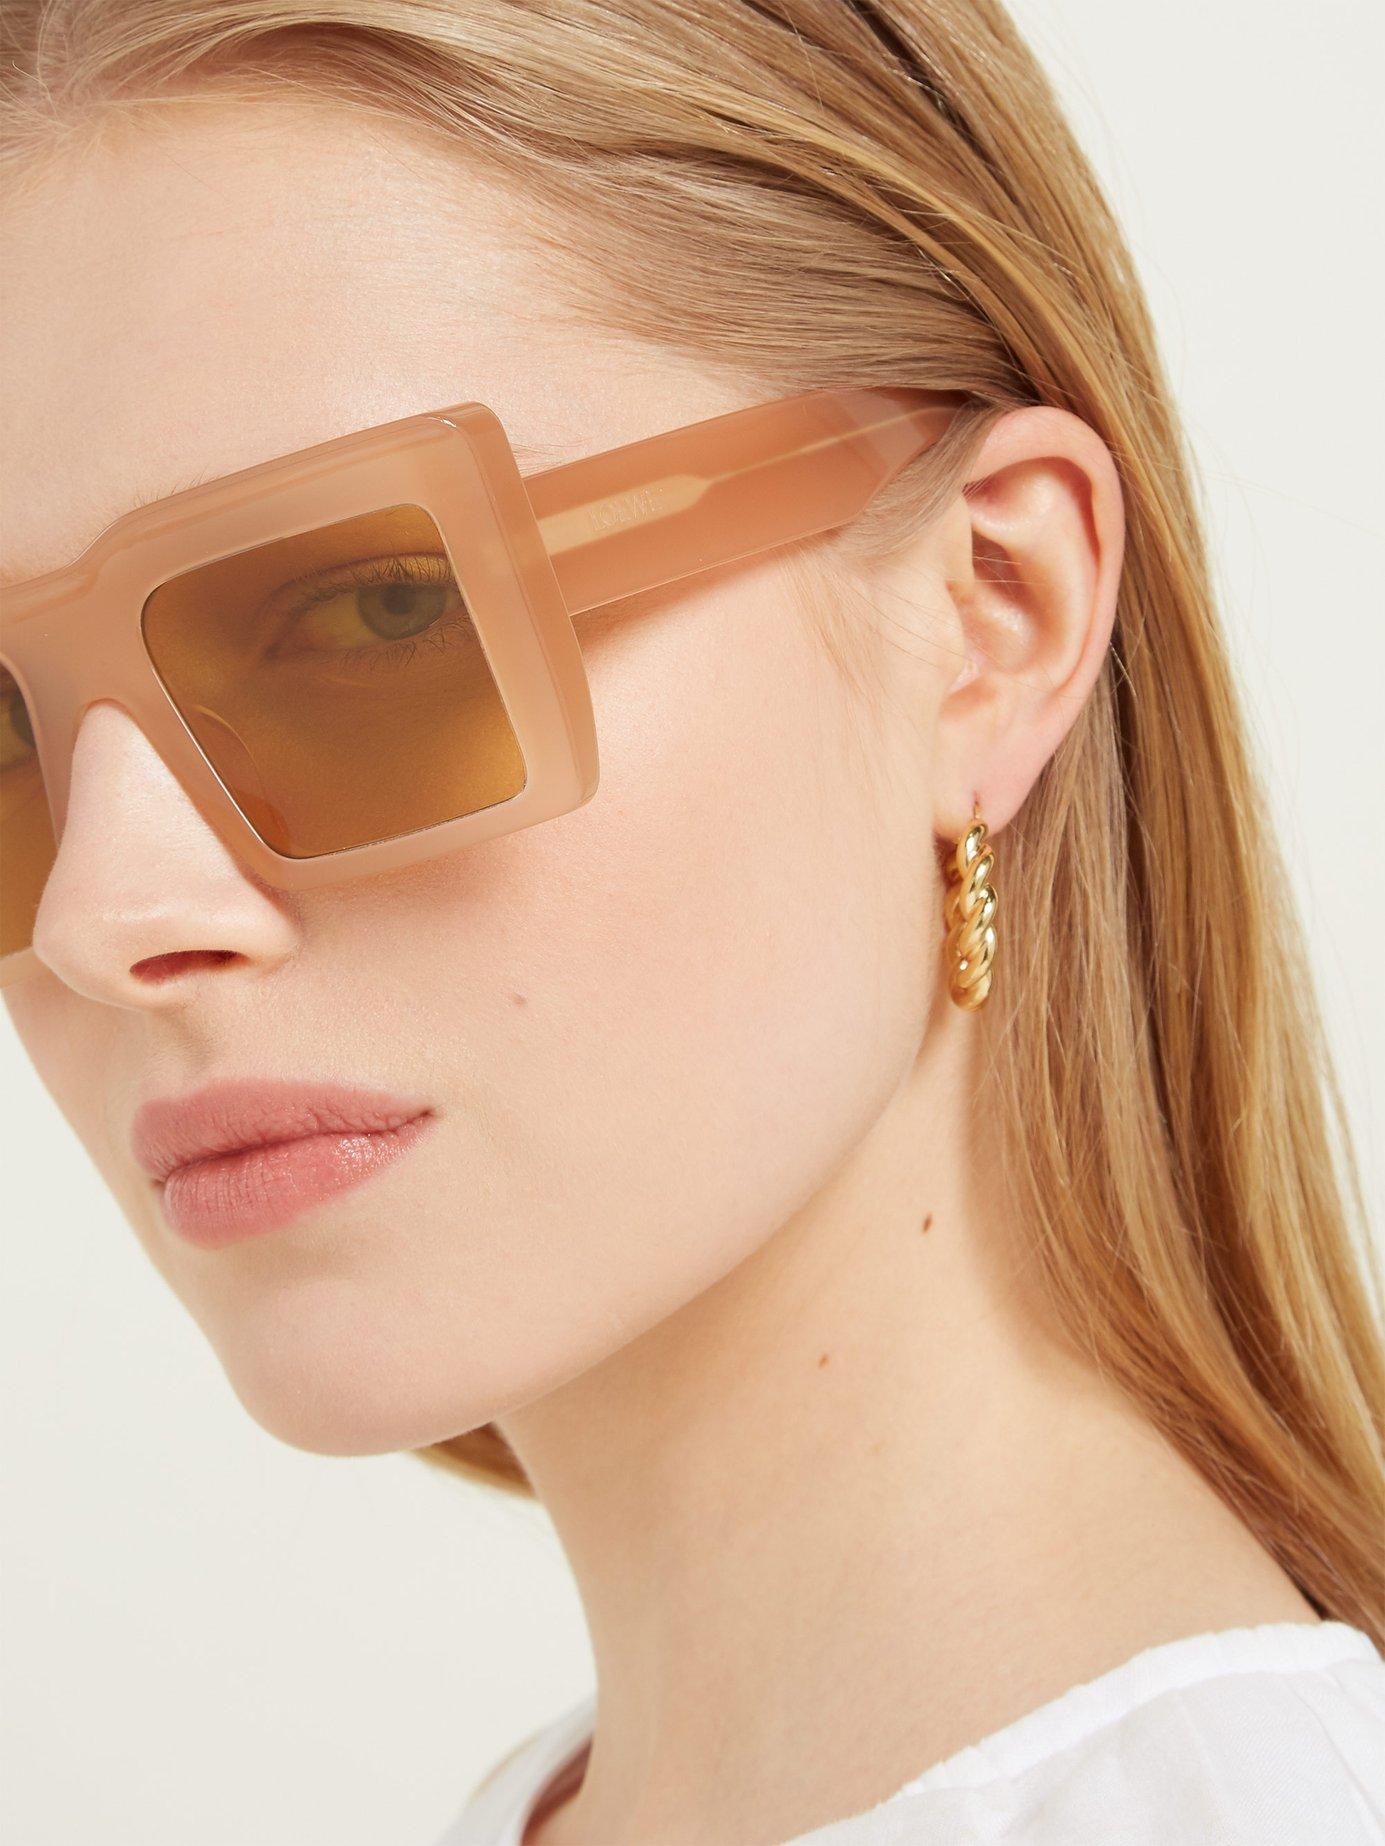 Loewe Square Shaped Oversize Sunglasses in Brown/Shiny Light Brown ...